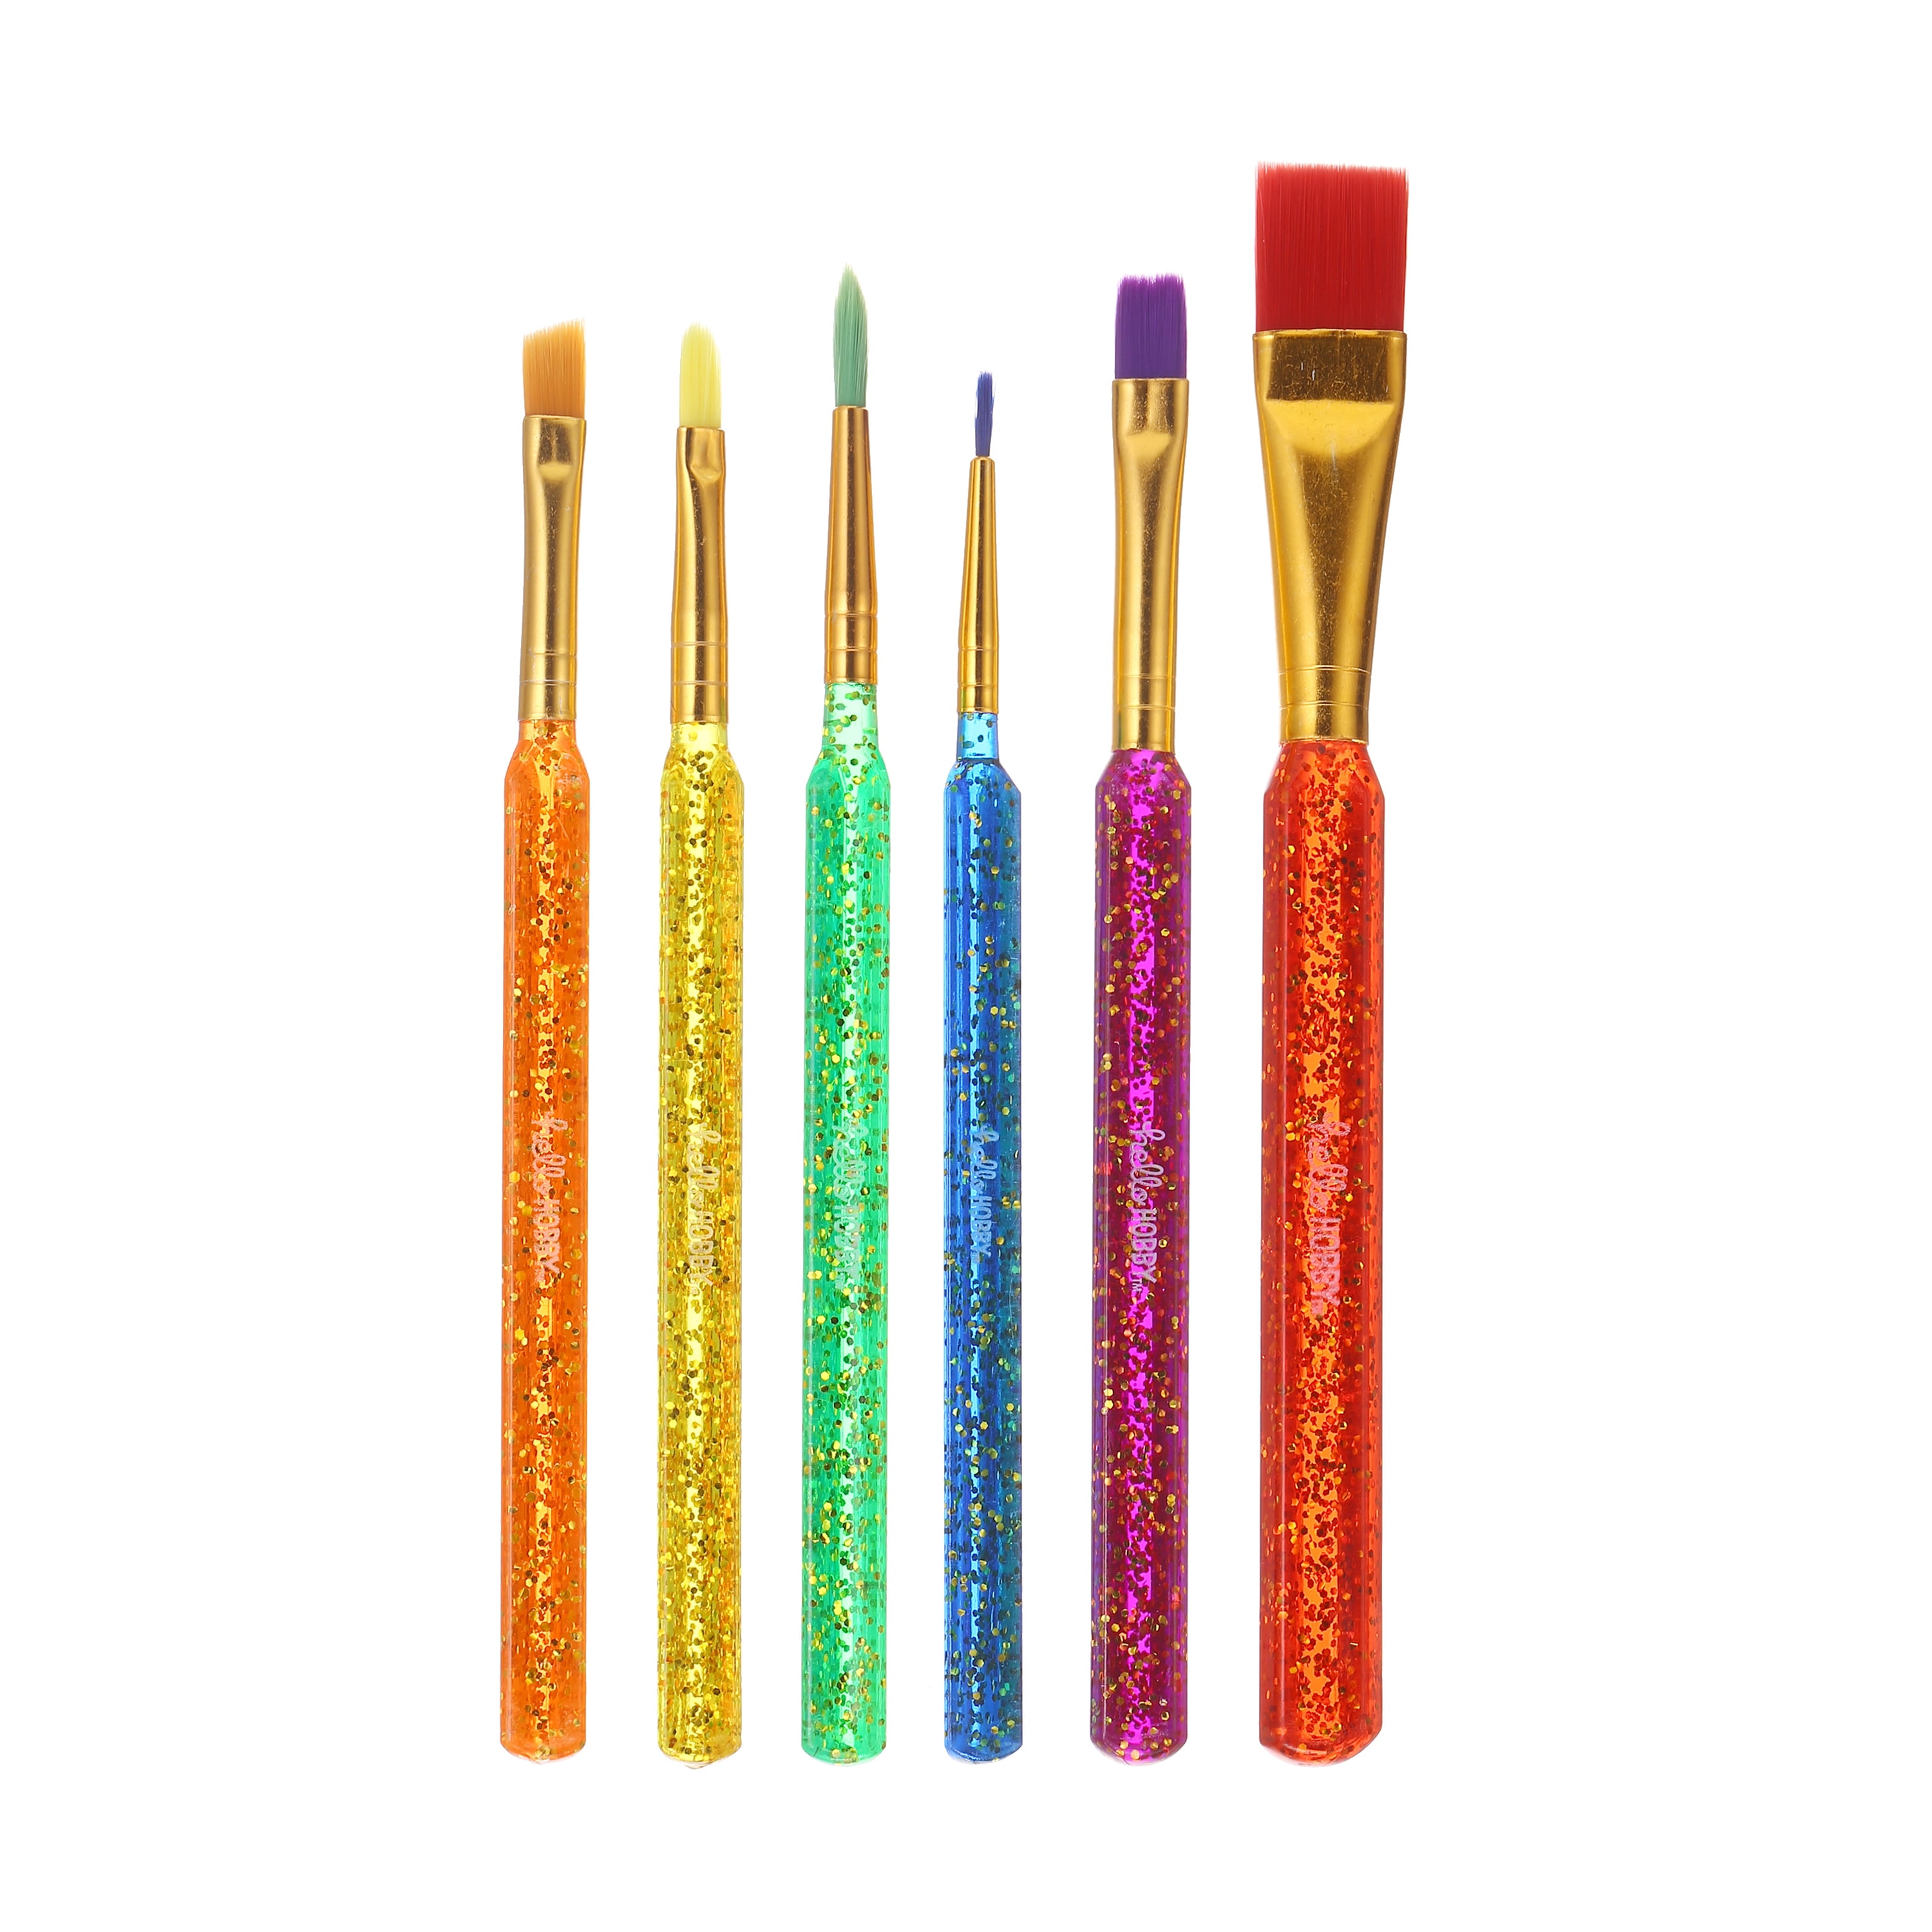 Hello Hobby 10 PC Comfort Grip Glass & Fabric Paint Brush Set with Assorted Synthetic and Natural Bristles